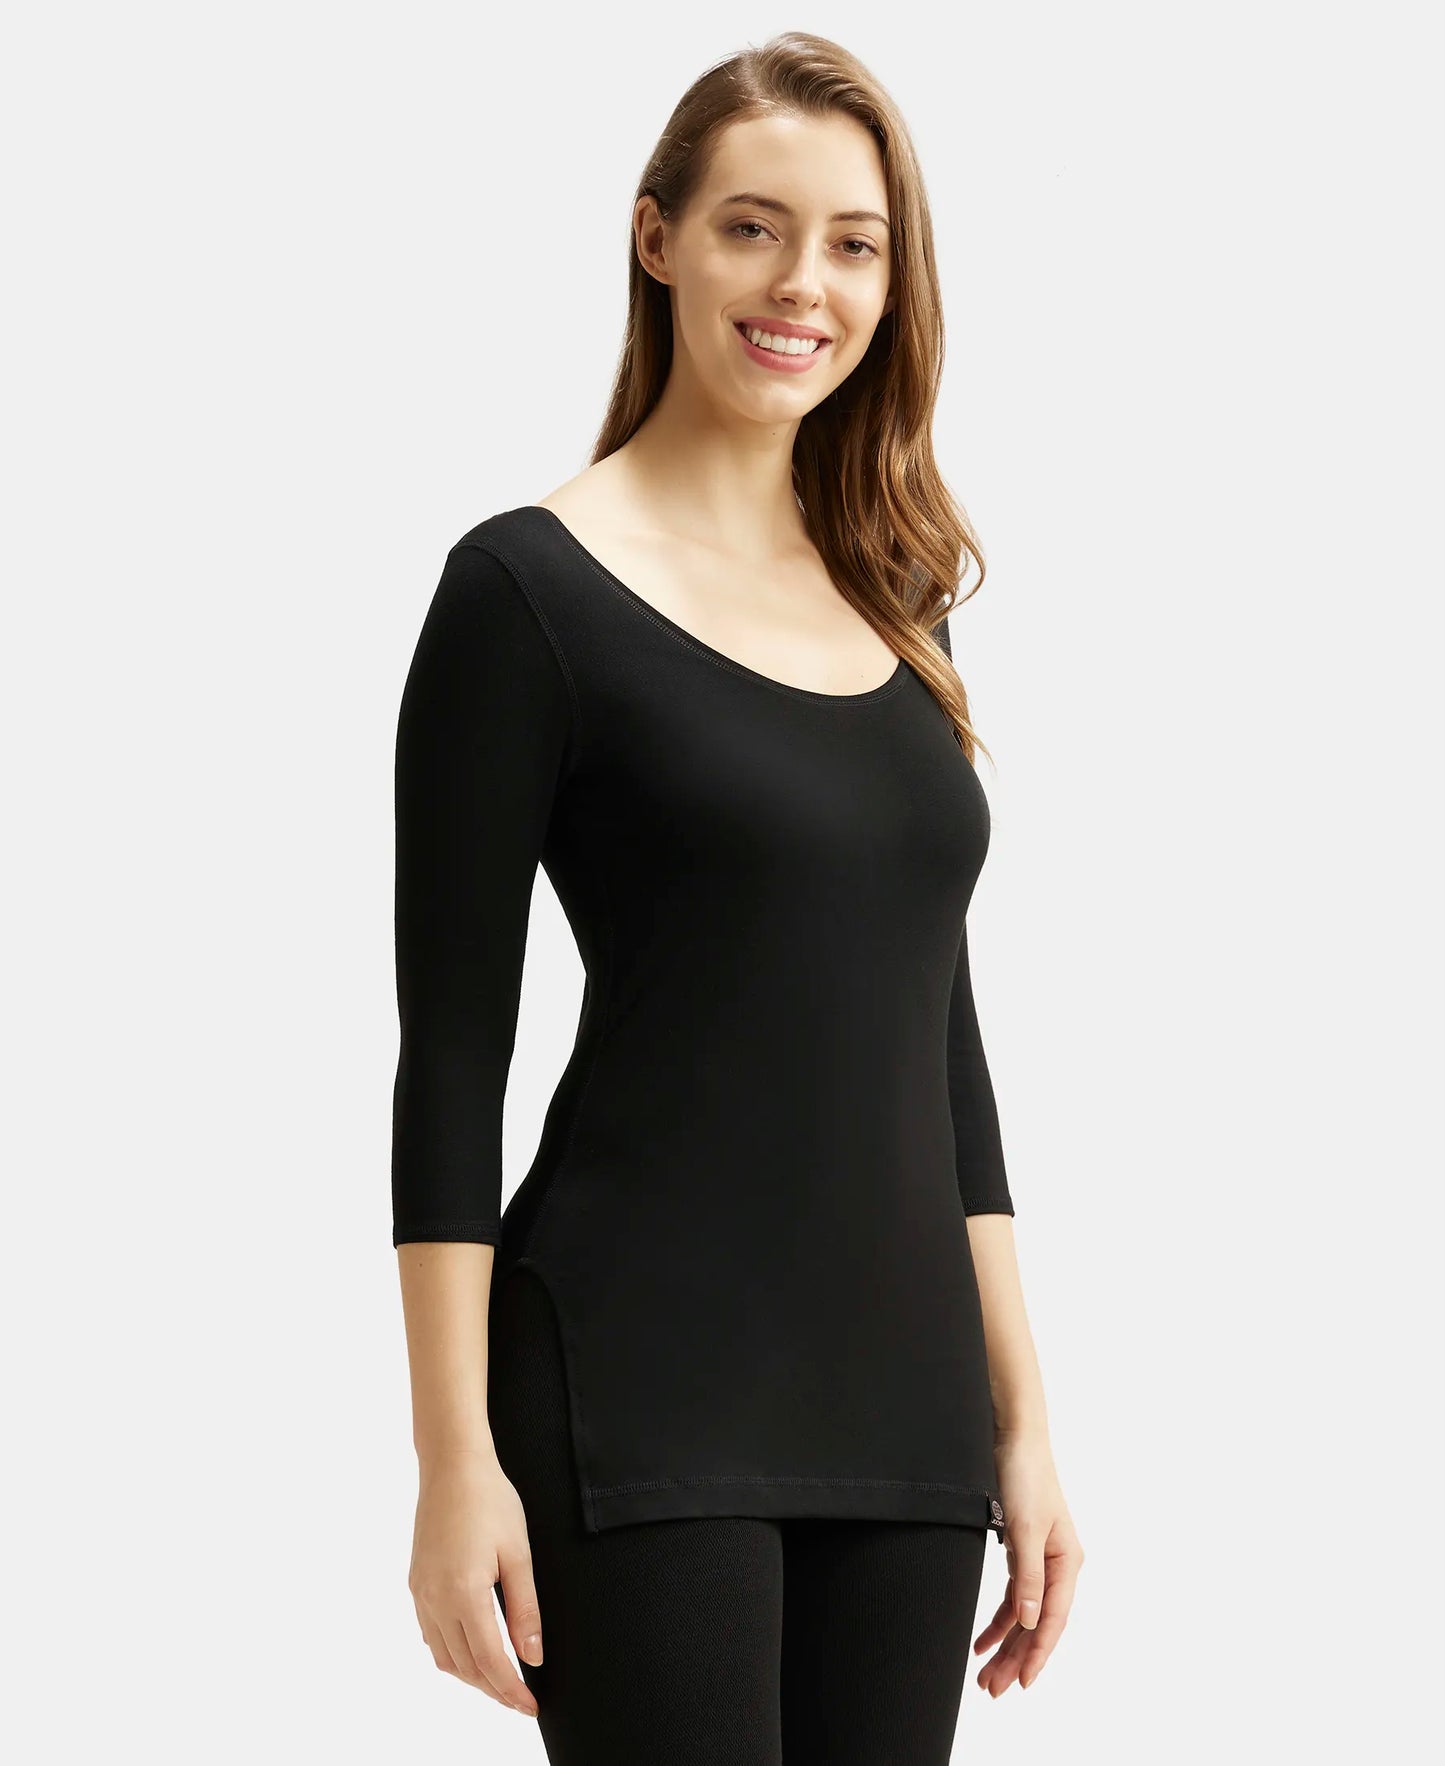 Soft Touch Microfiber Elastane Three Quarter Sleeve Thermal Top with StayWarm Technology - Black-2